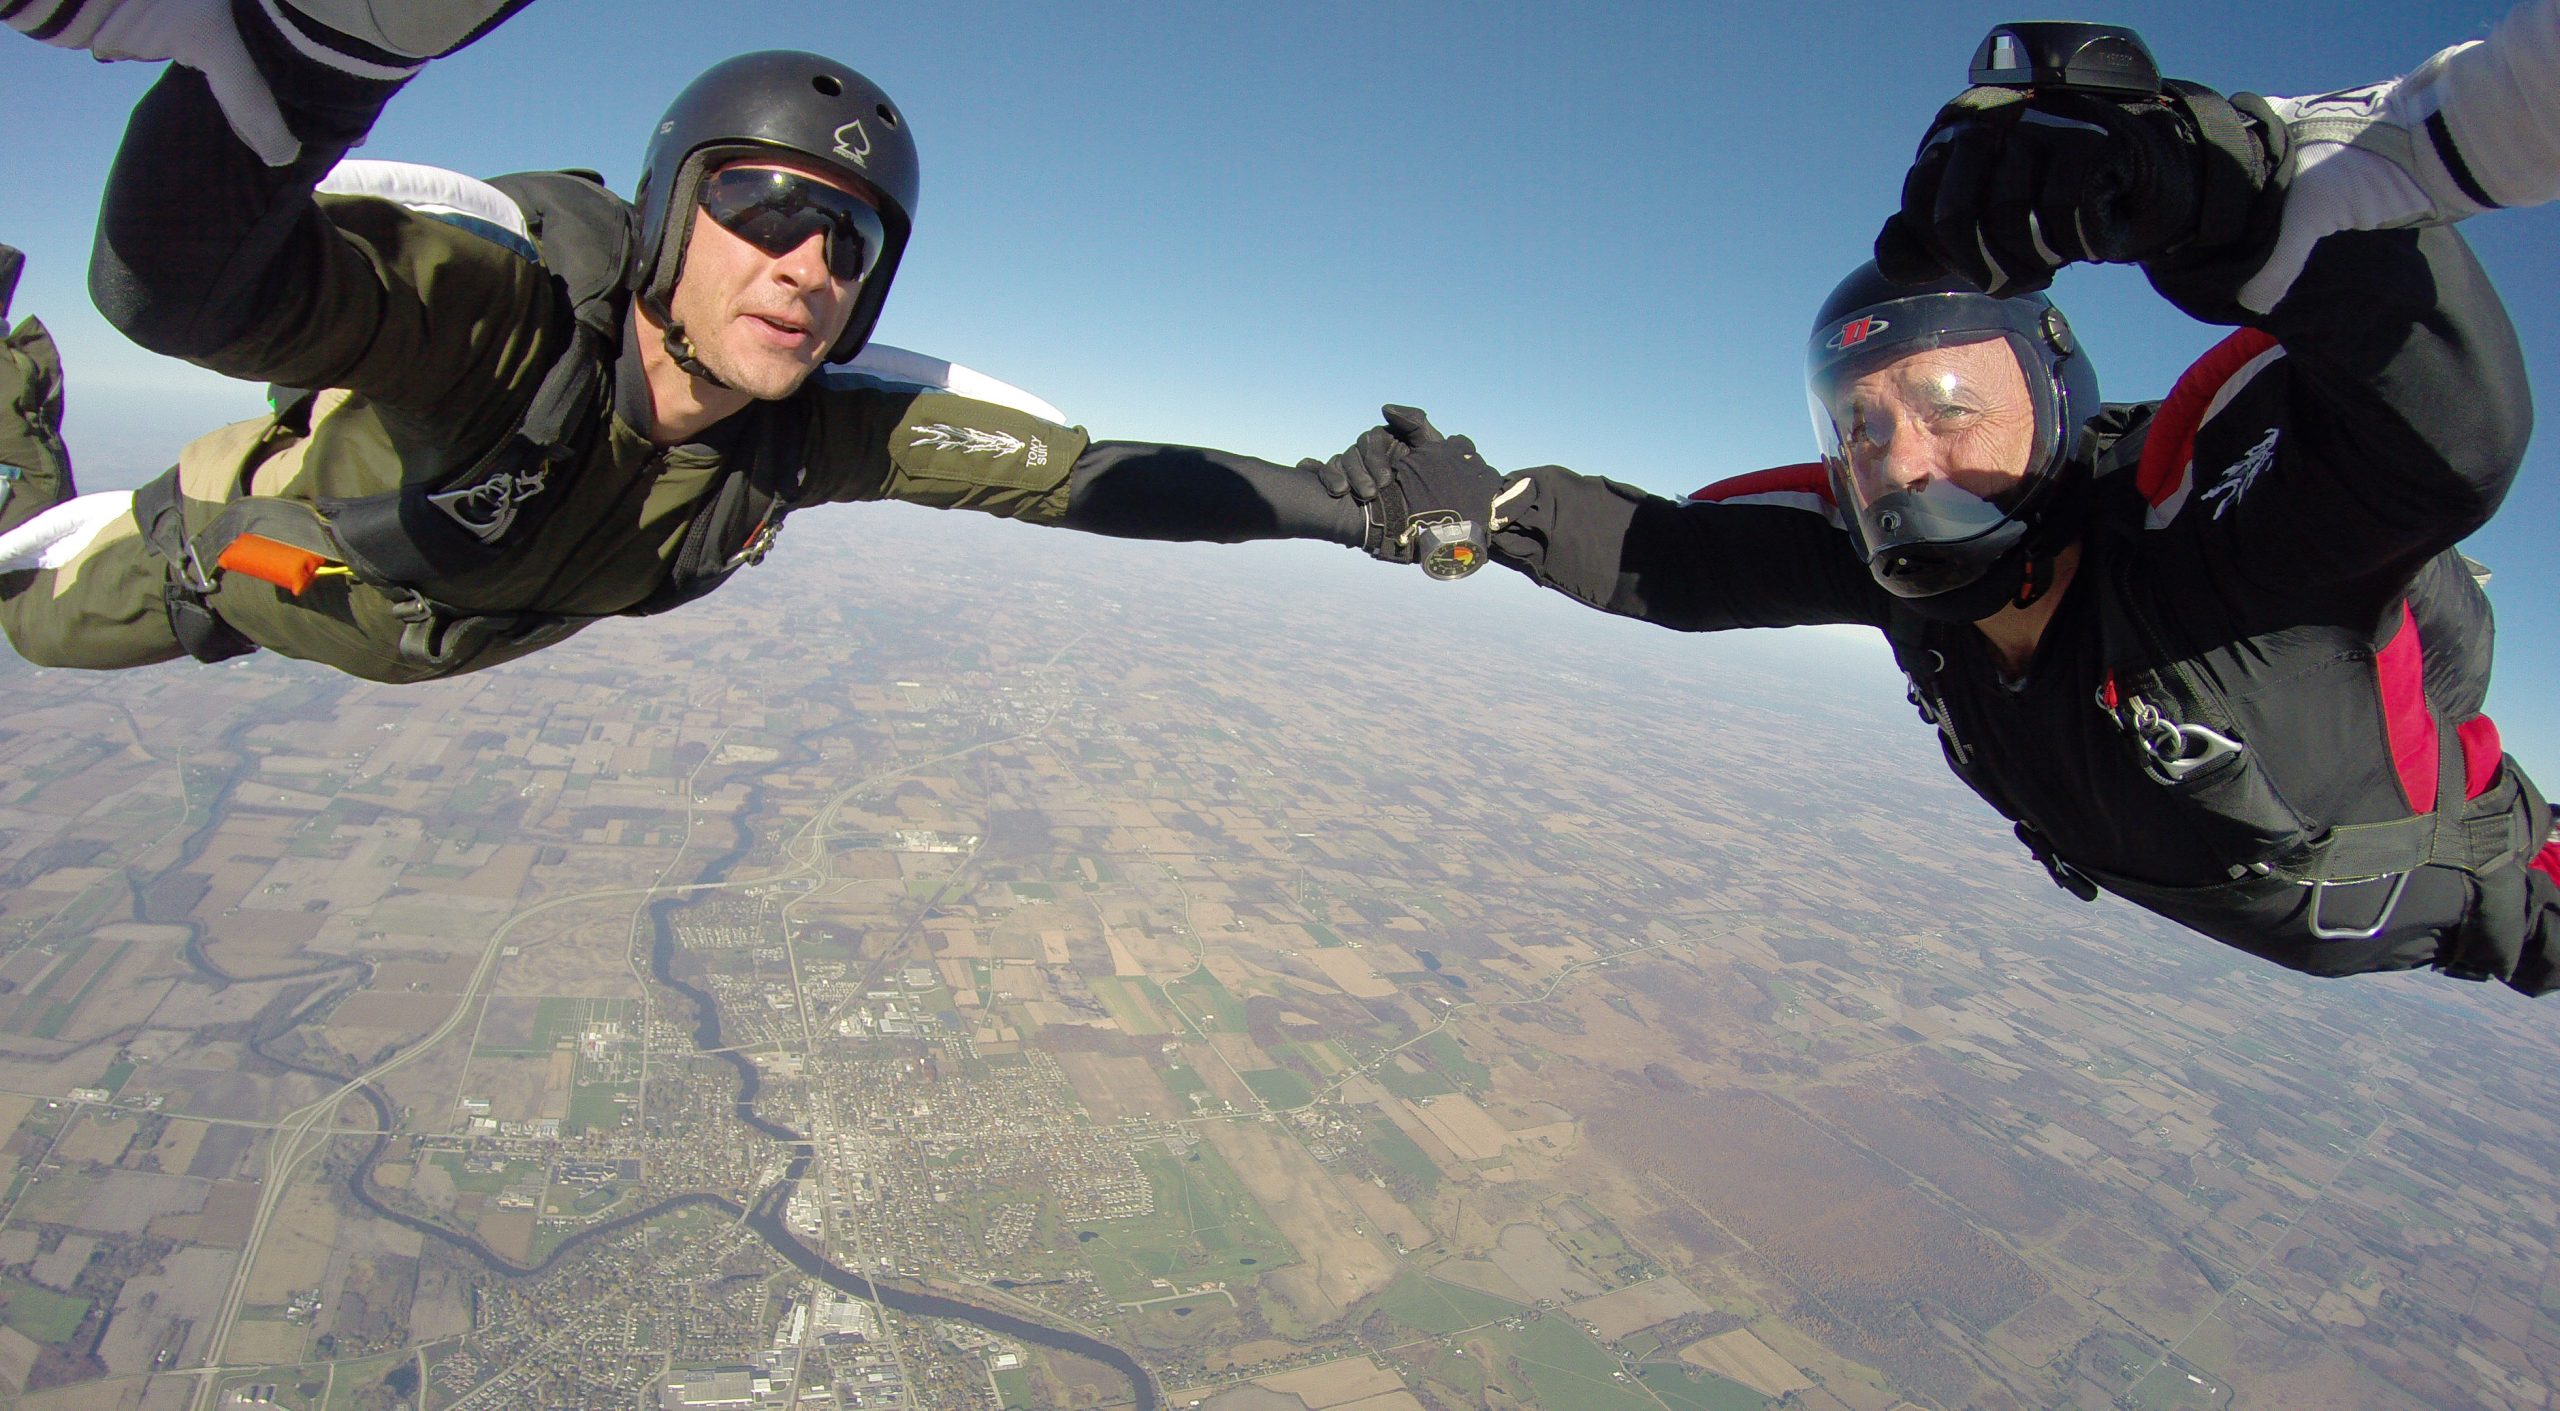 What is a skydiving cutaway?